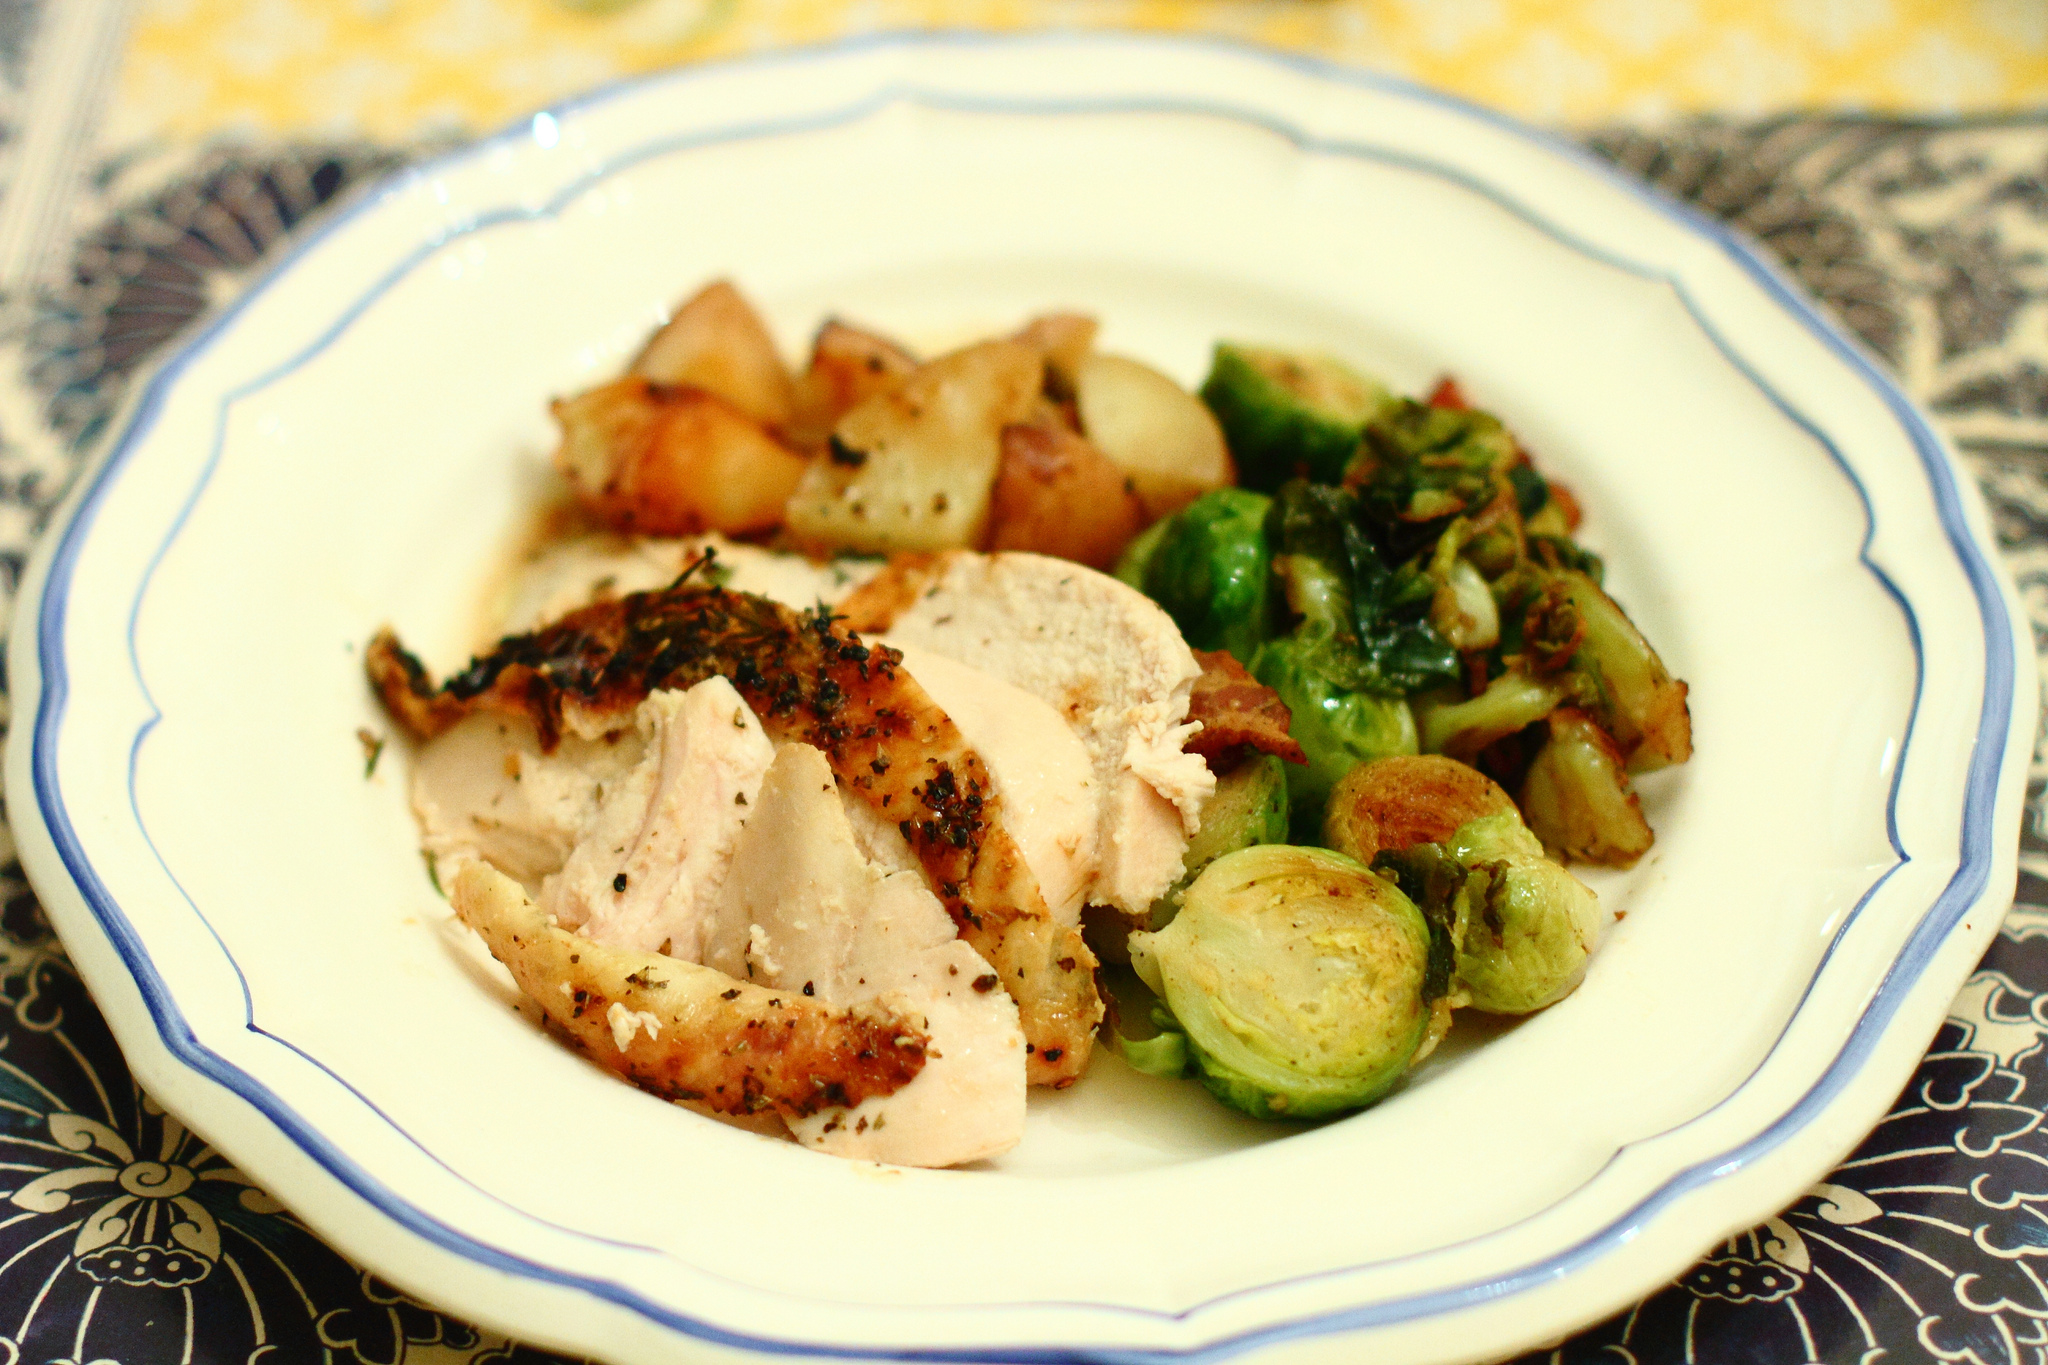 Roast Chicken and Potatoes with Brussels Sprouts and Bacon